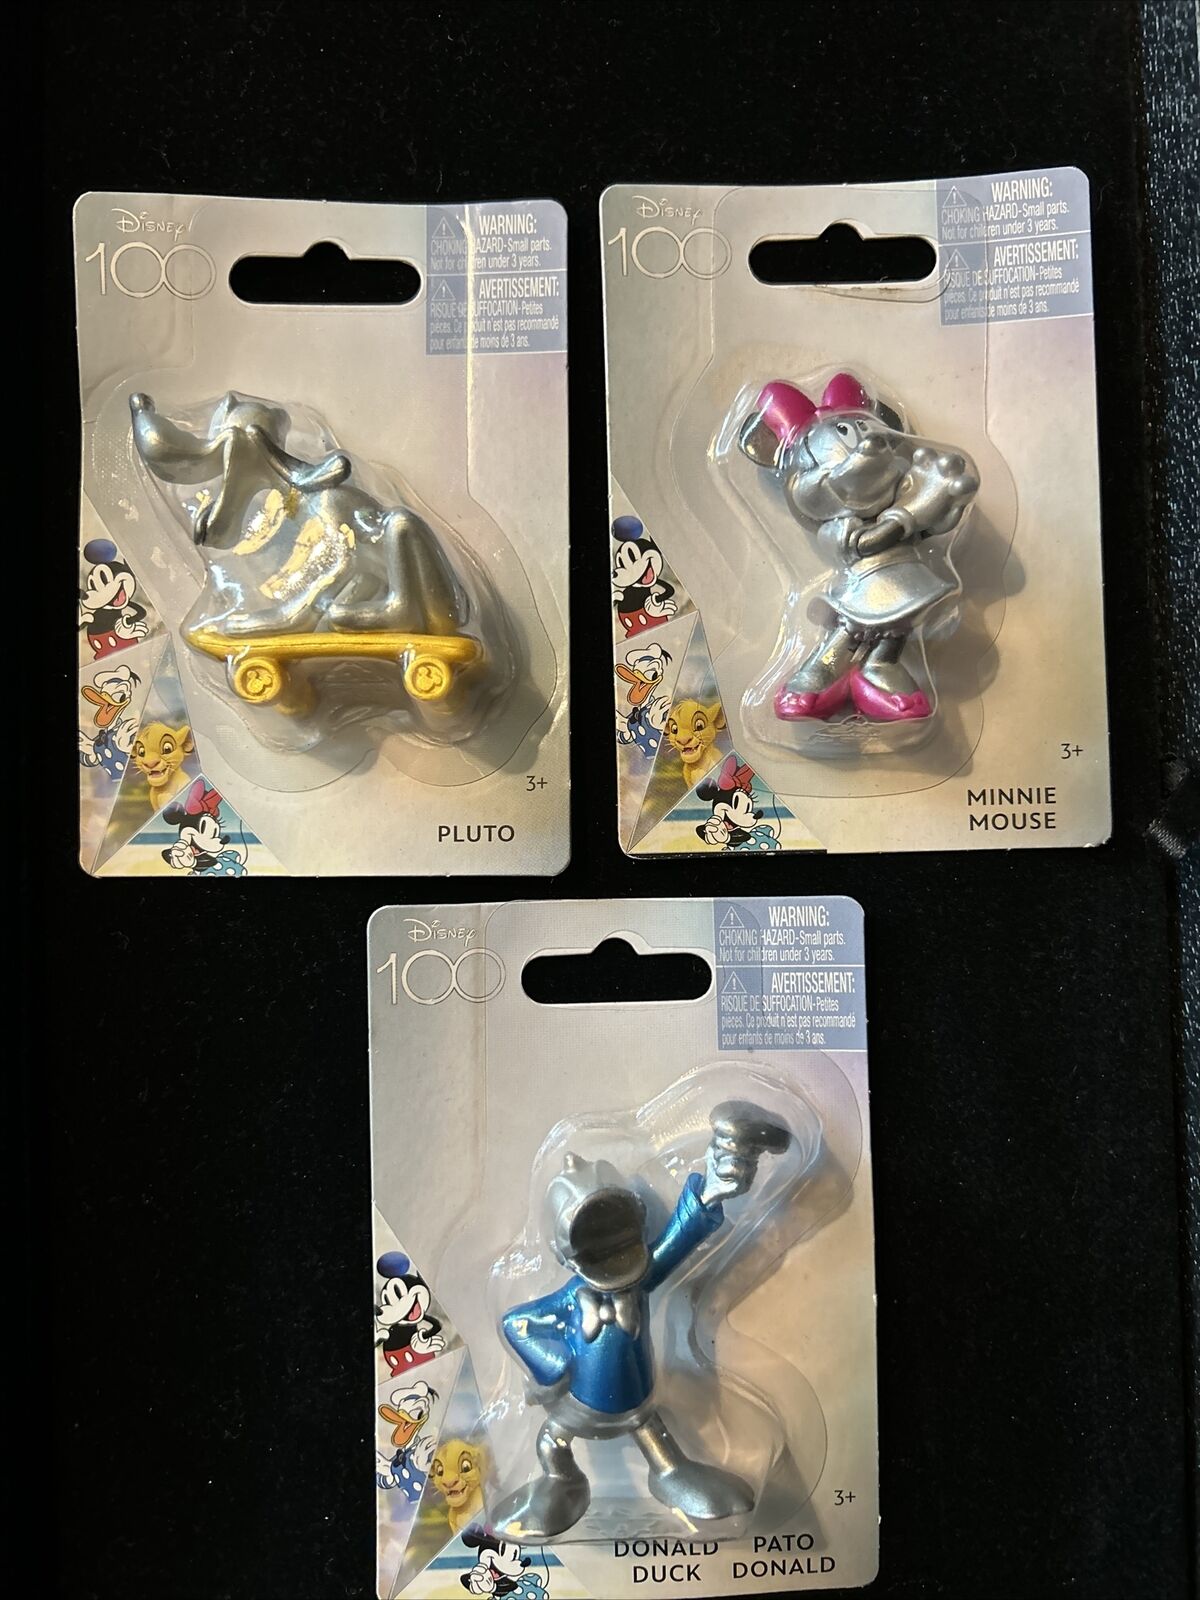 Lot of 3 Disney 100 Year Ann. Figures in Package Silver Pluto-Minnie-Donald